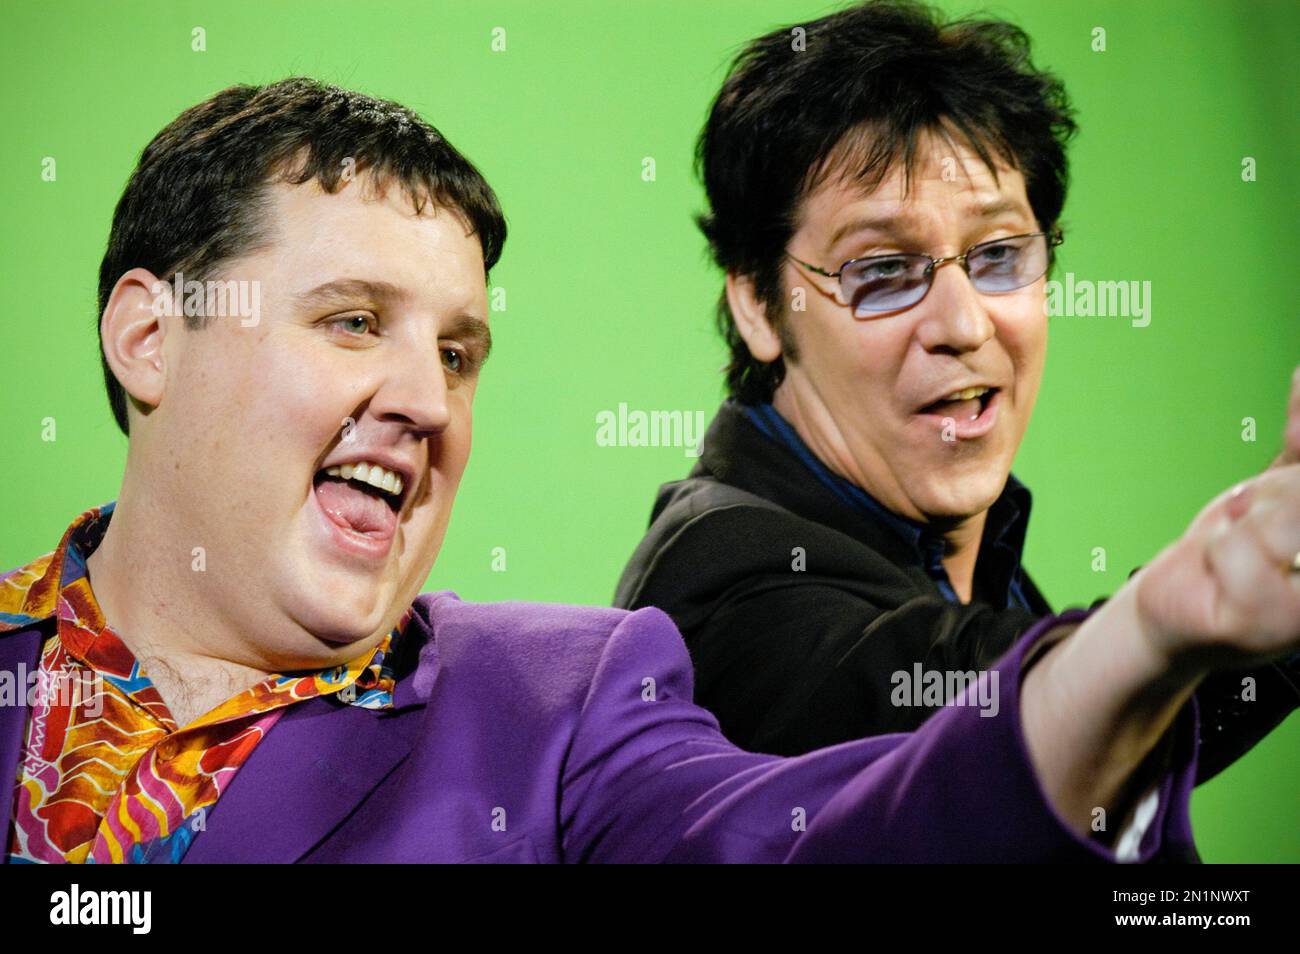 Shakin' Stevens photographed with Peter Kay during the iconic 2005 Comic Relief 'Amarillo' video shoot. Stock Photo